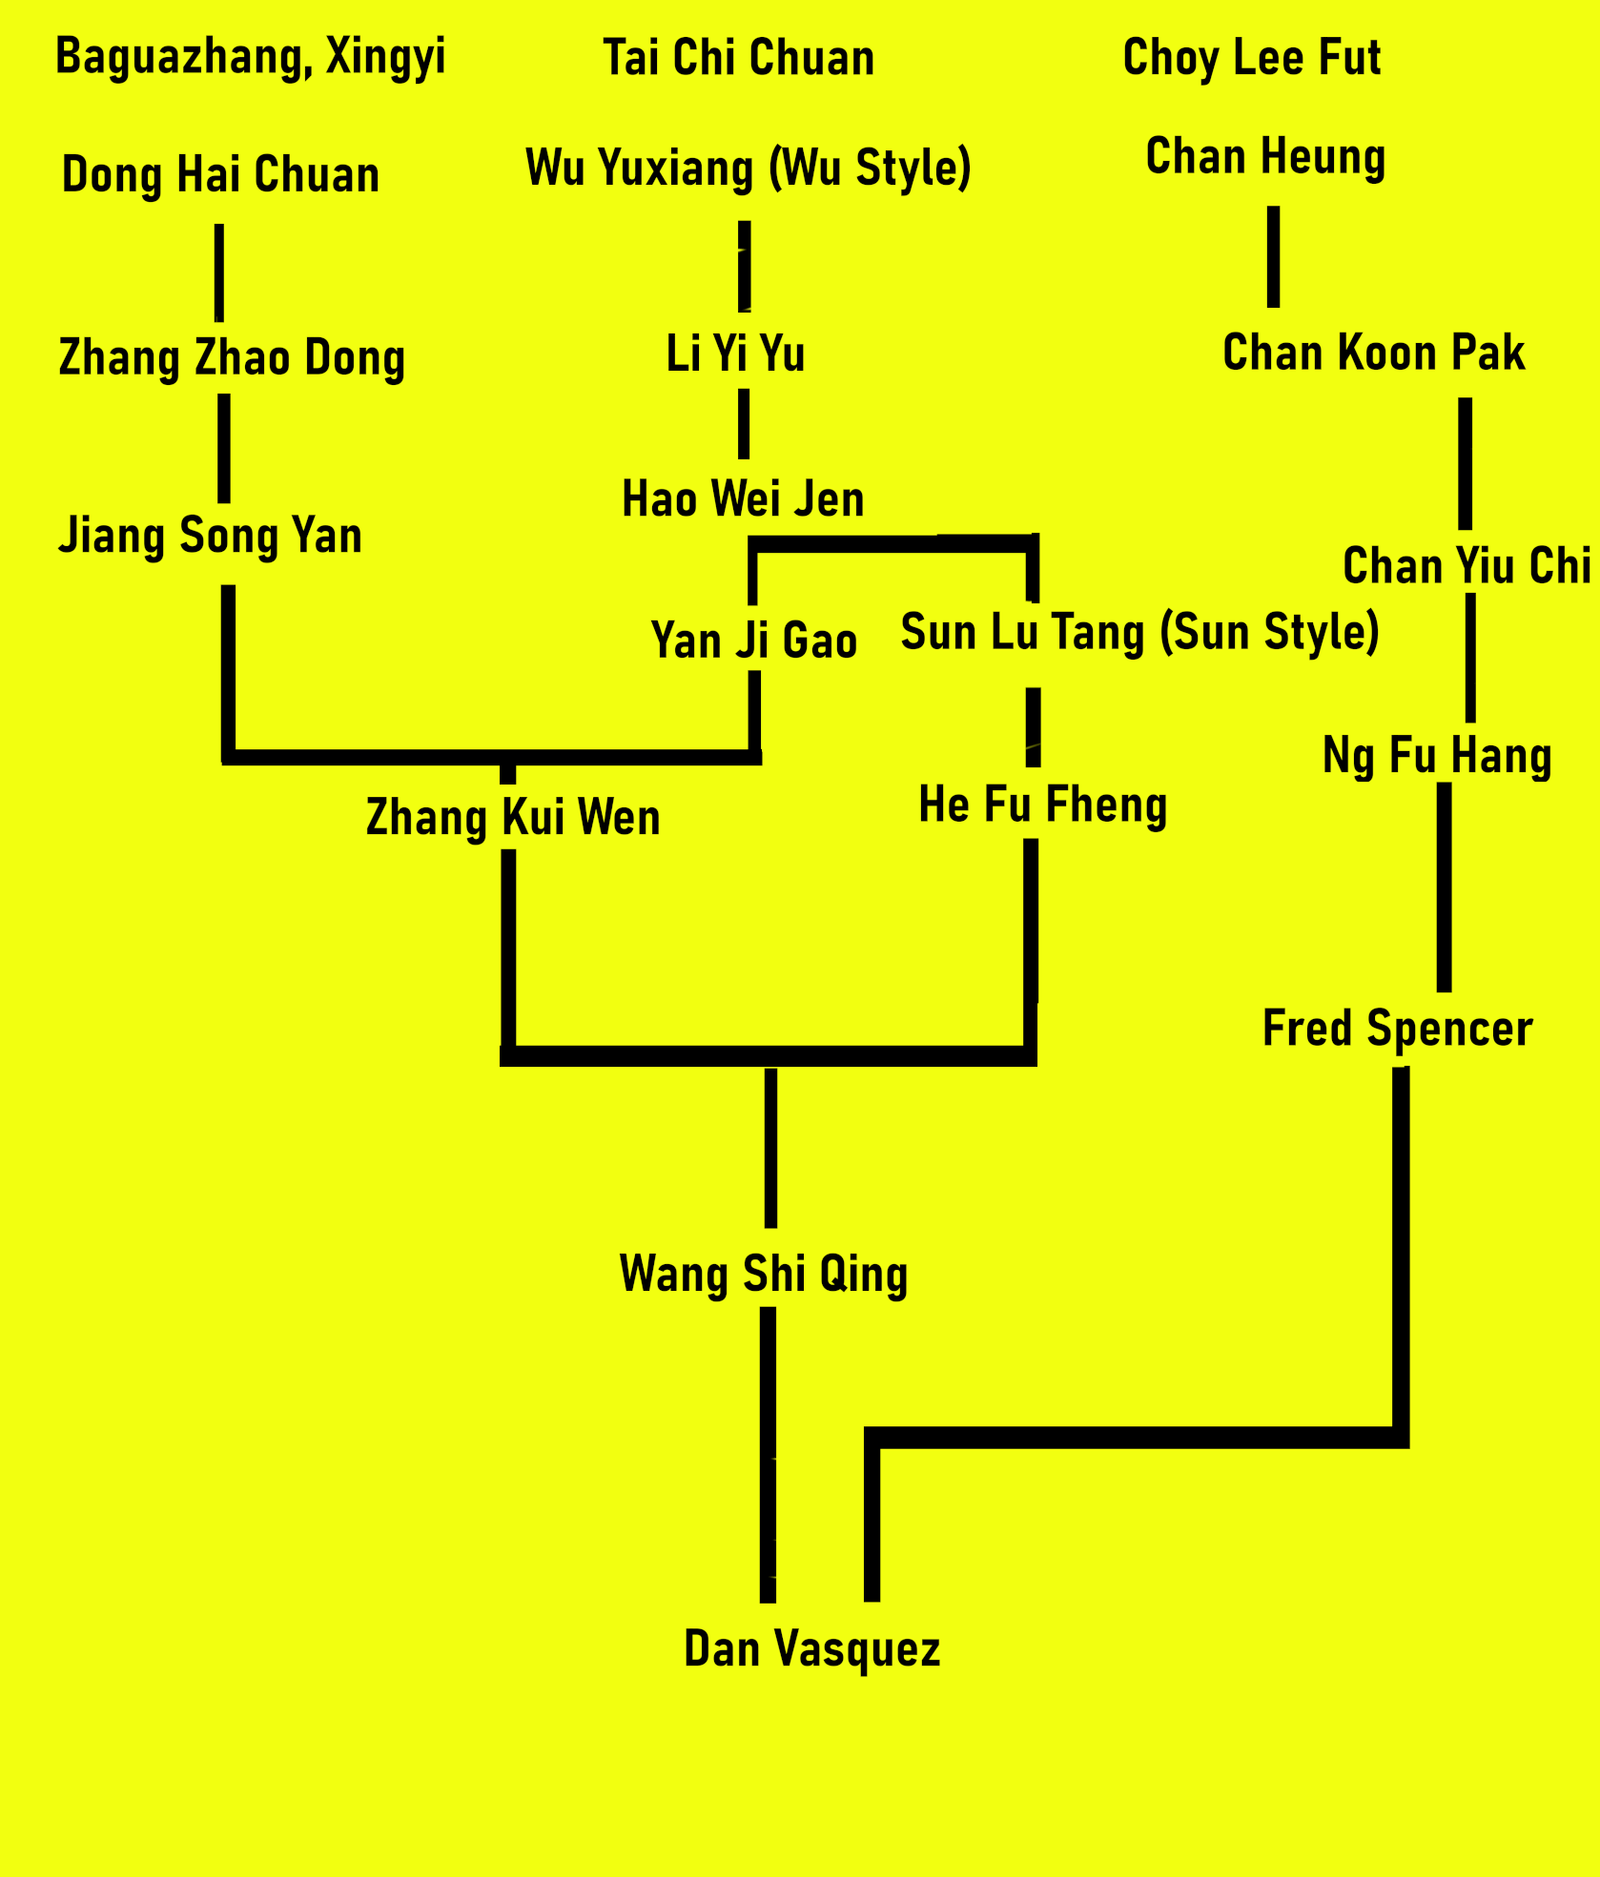 Our lineage chart